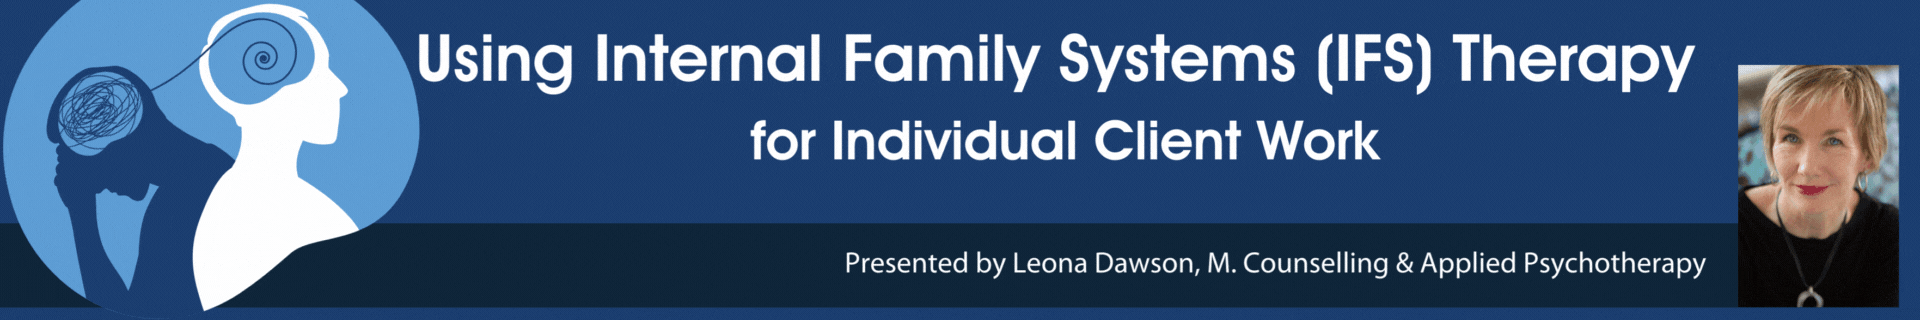 Using Internal Family Systems (IFS) Therapy for Individual Client Work